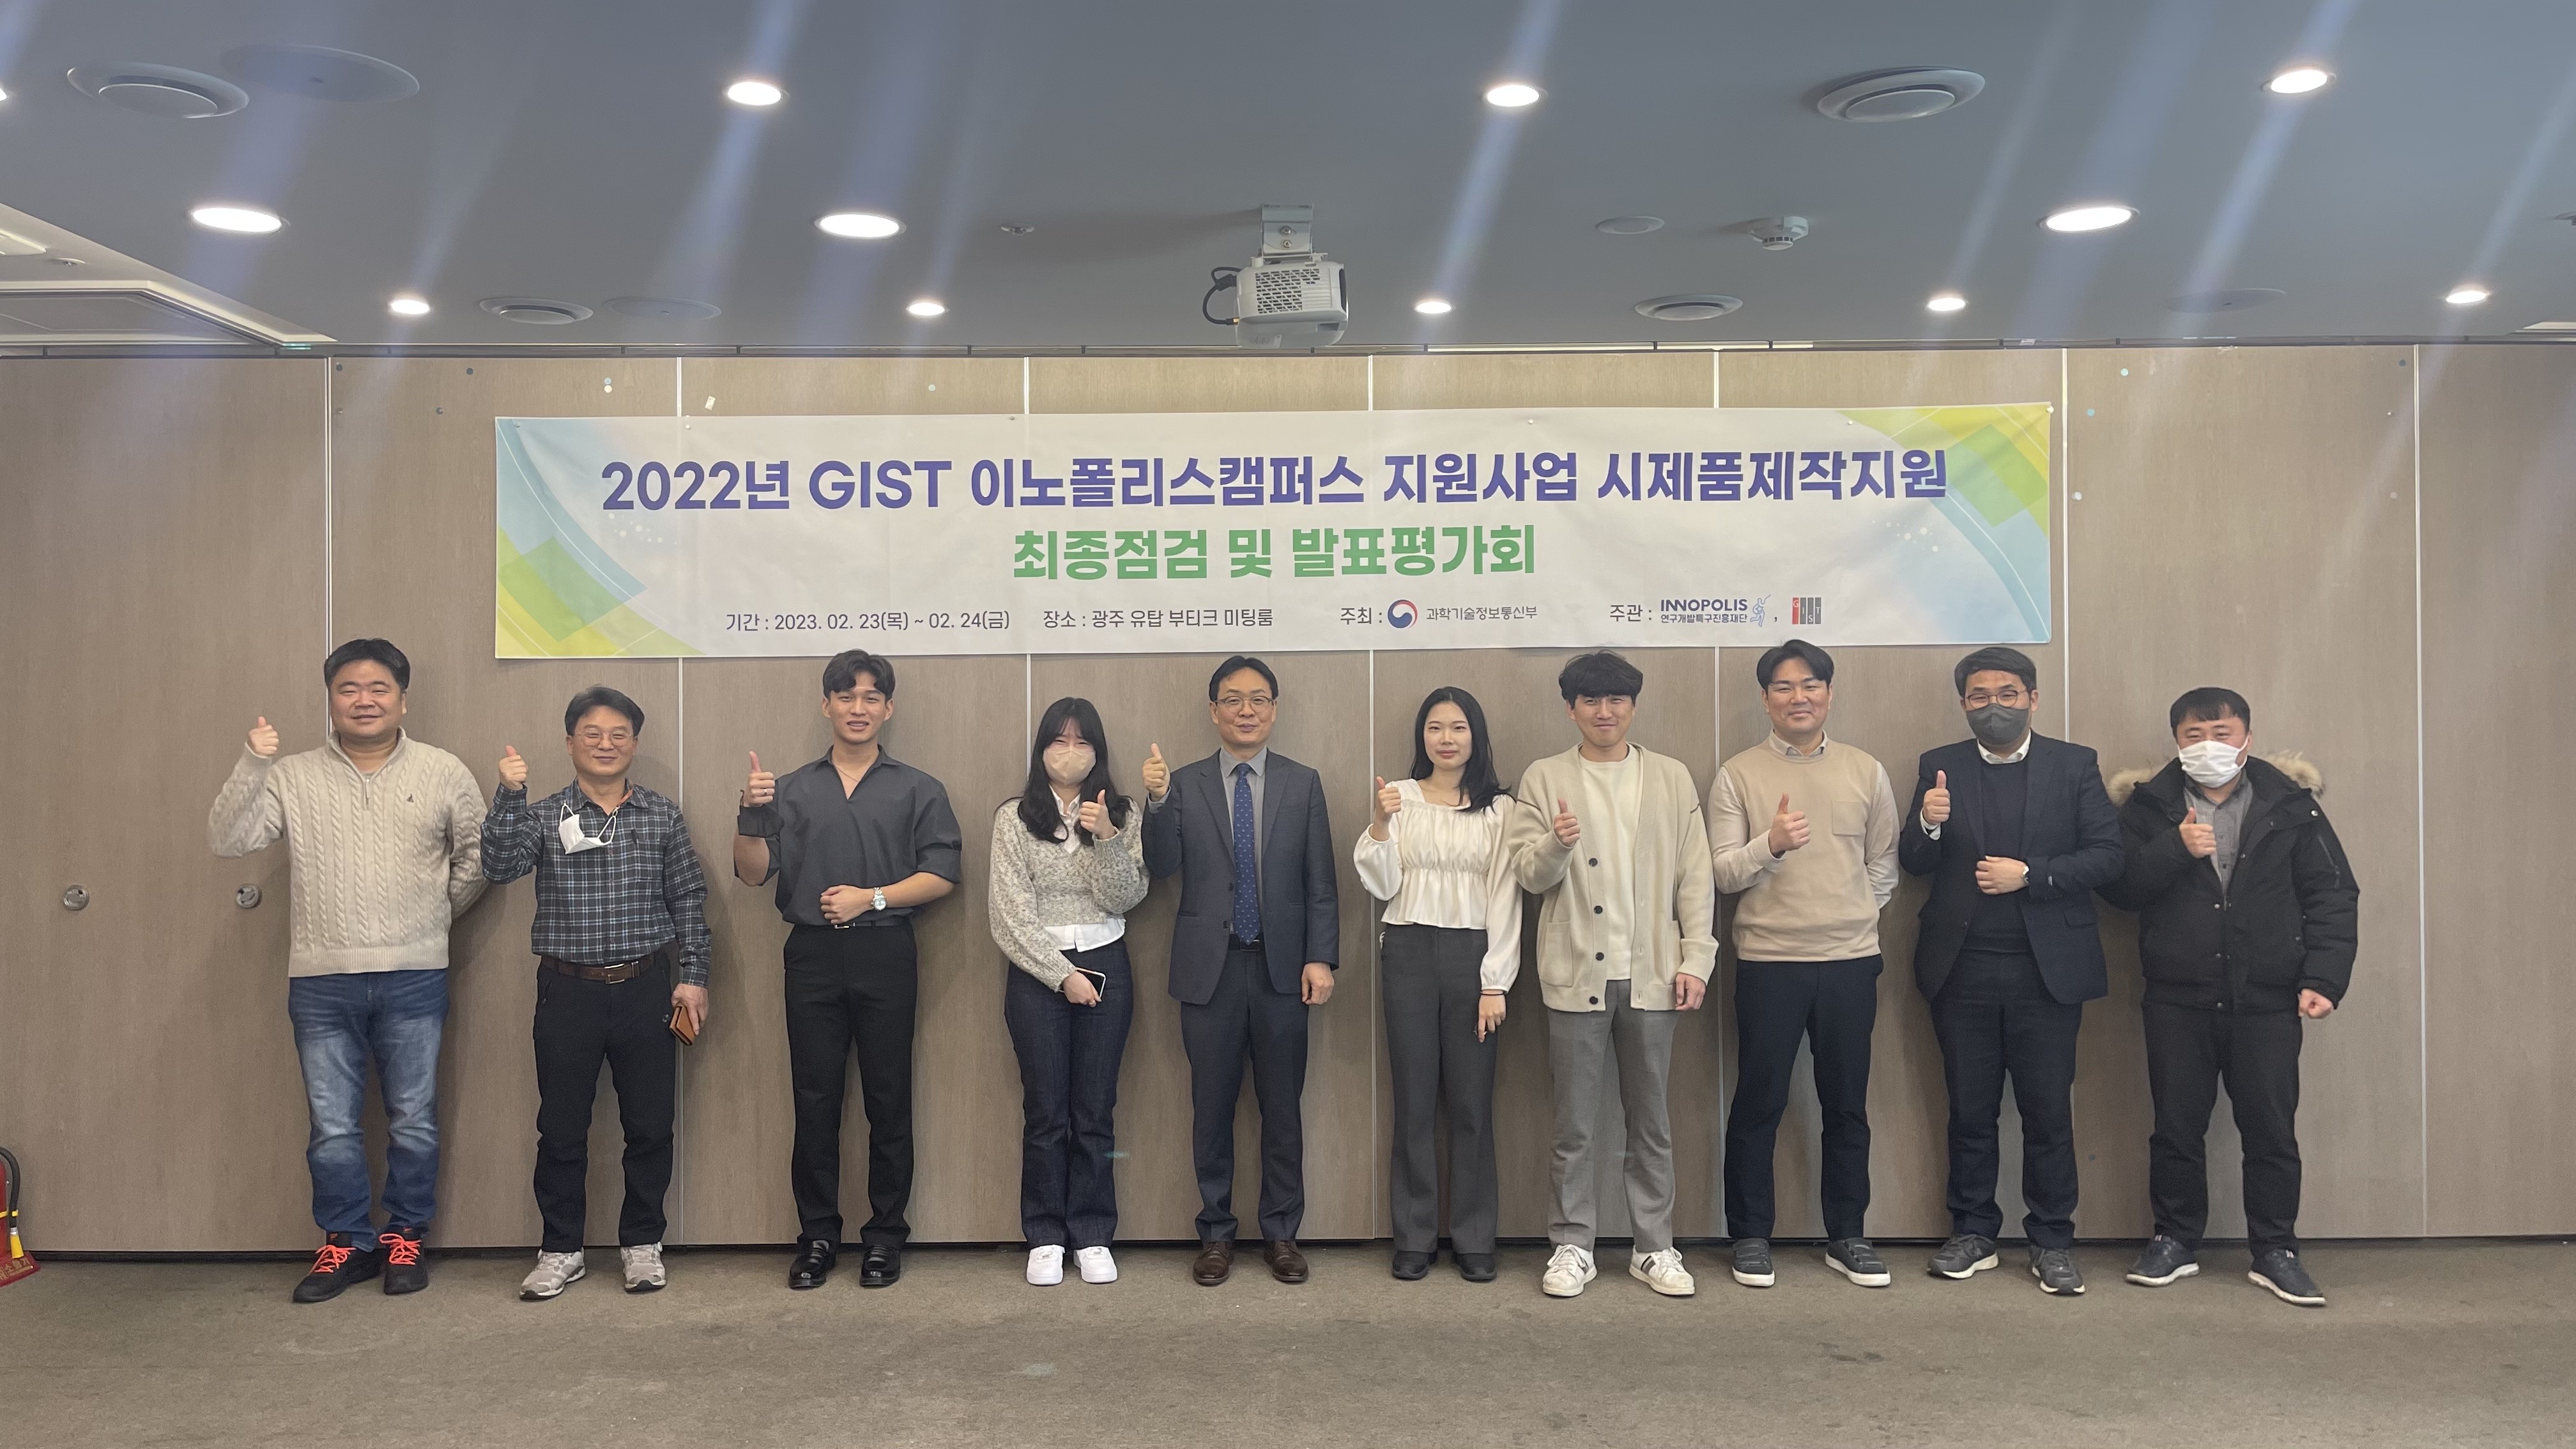 GIST Technology Commercialization Center, discovering and revitalizing of local technology 이미지